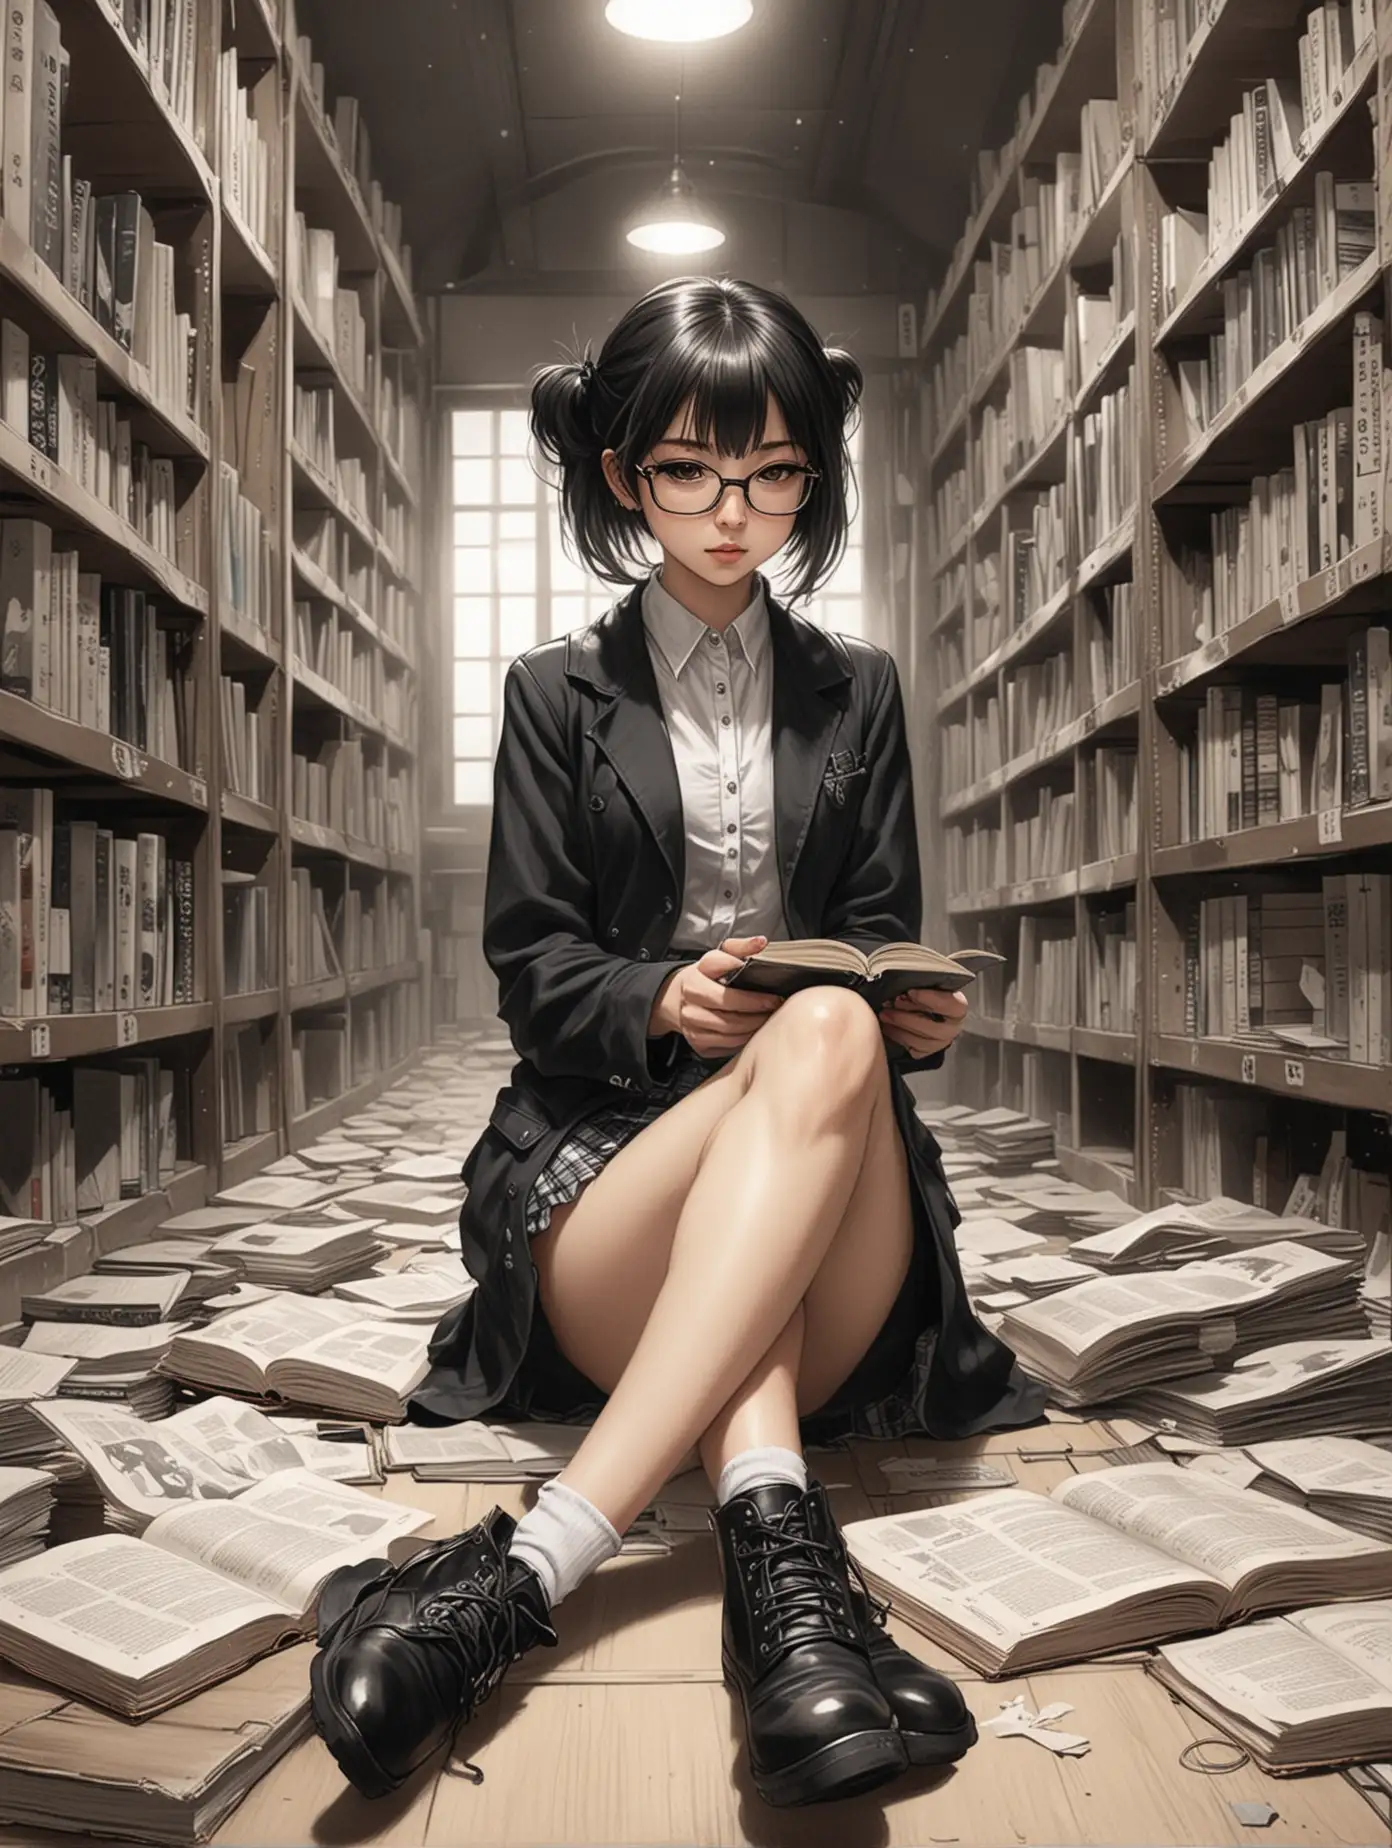 Fashionable Japanese Librarian Reading in Occult Library Annex